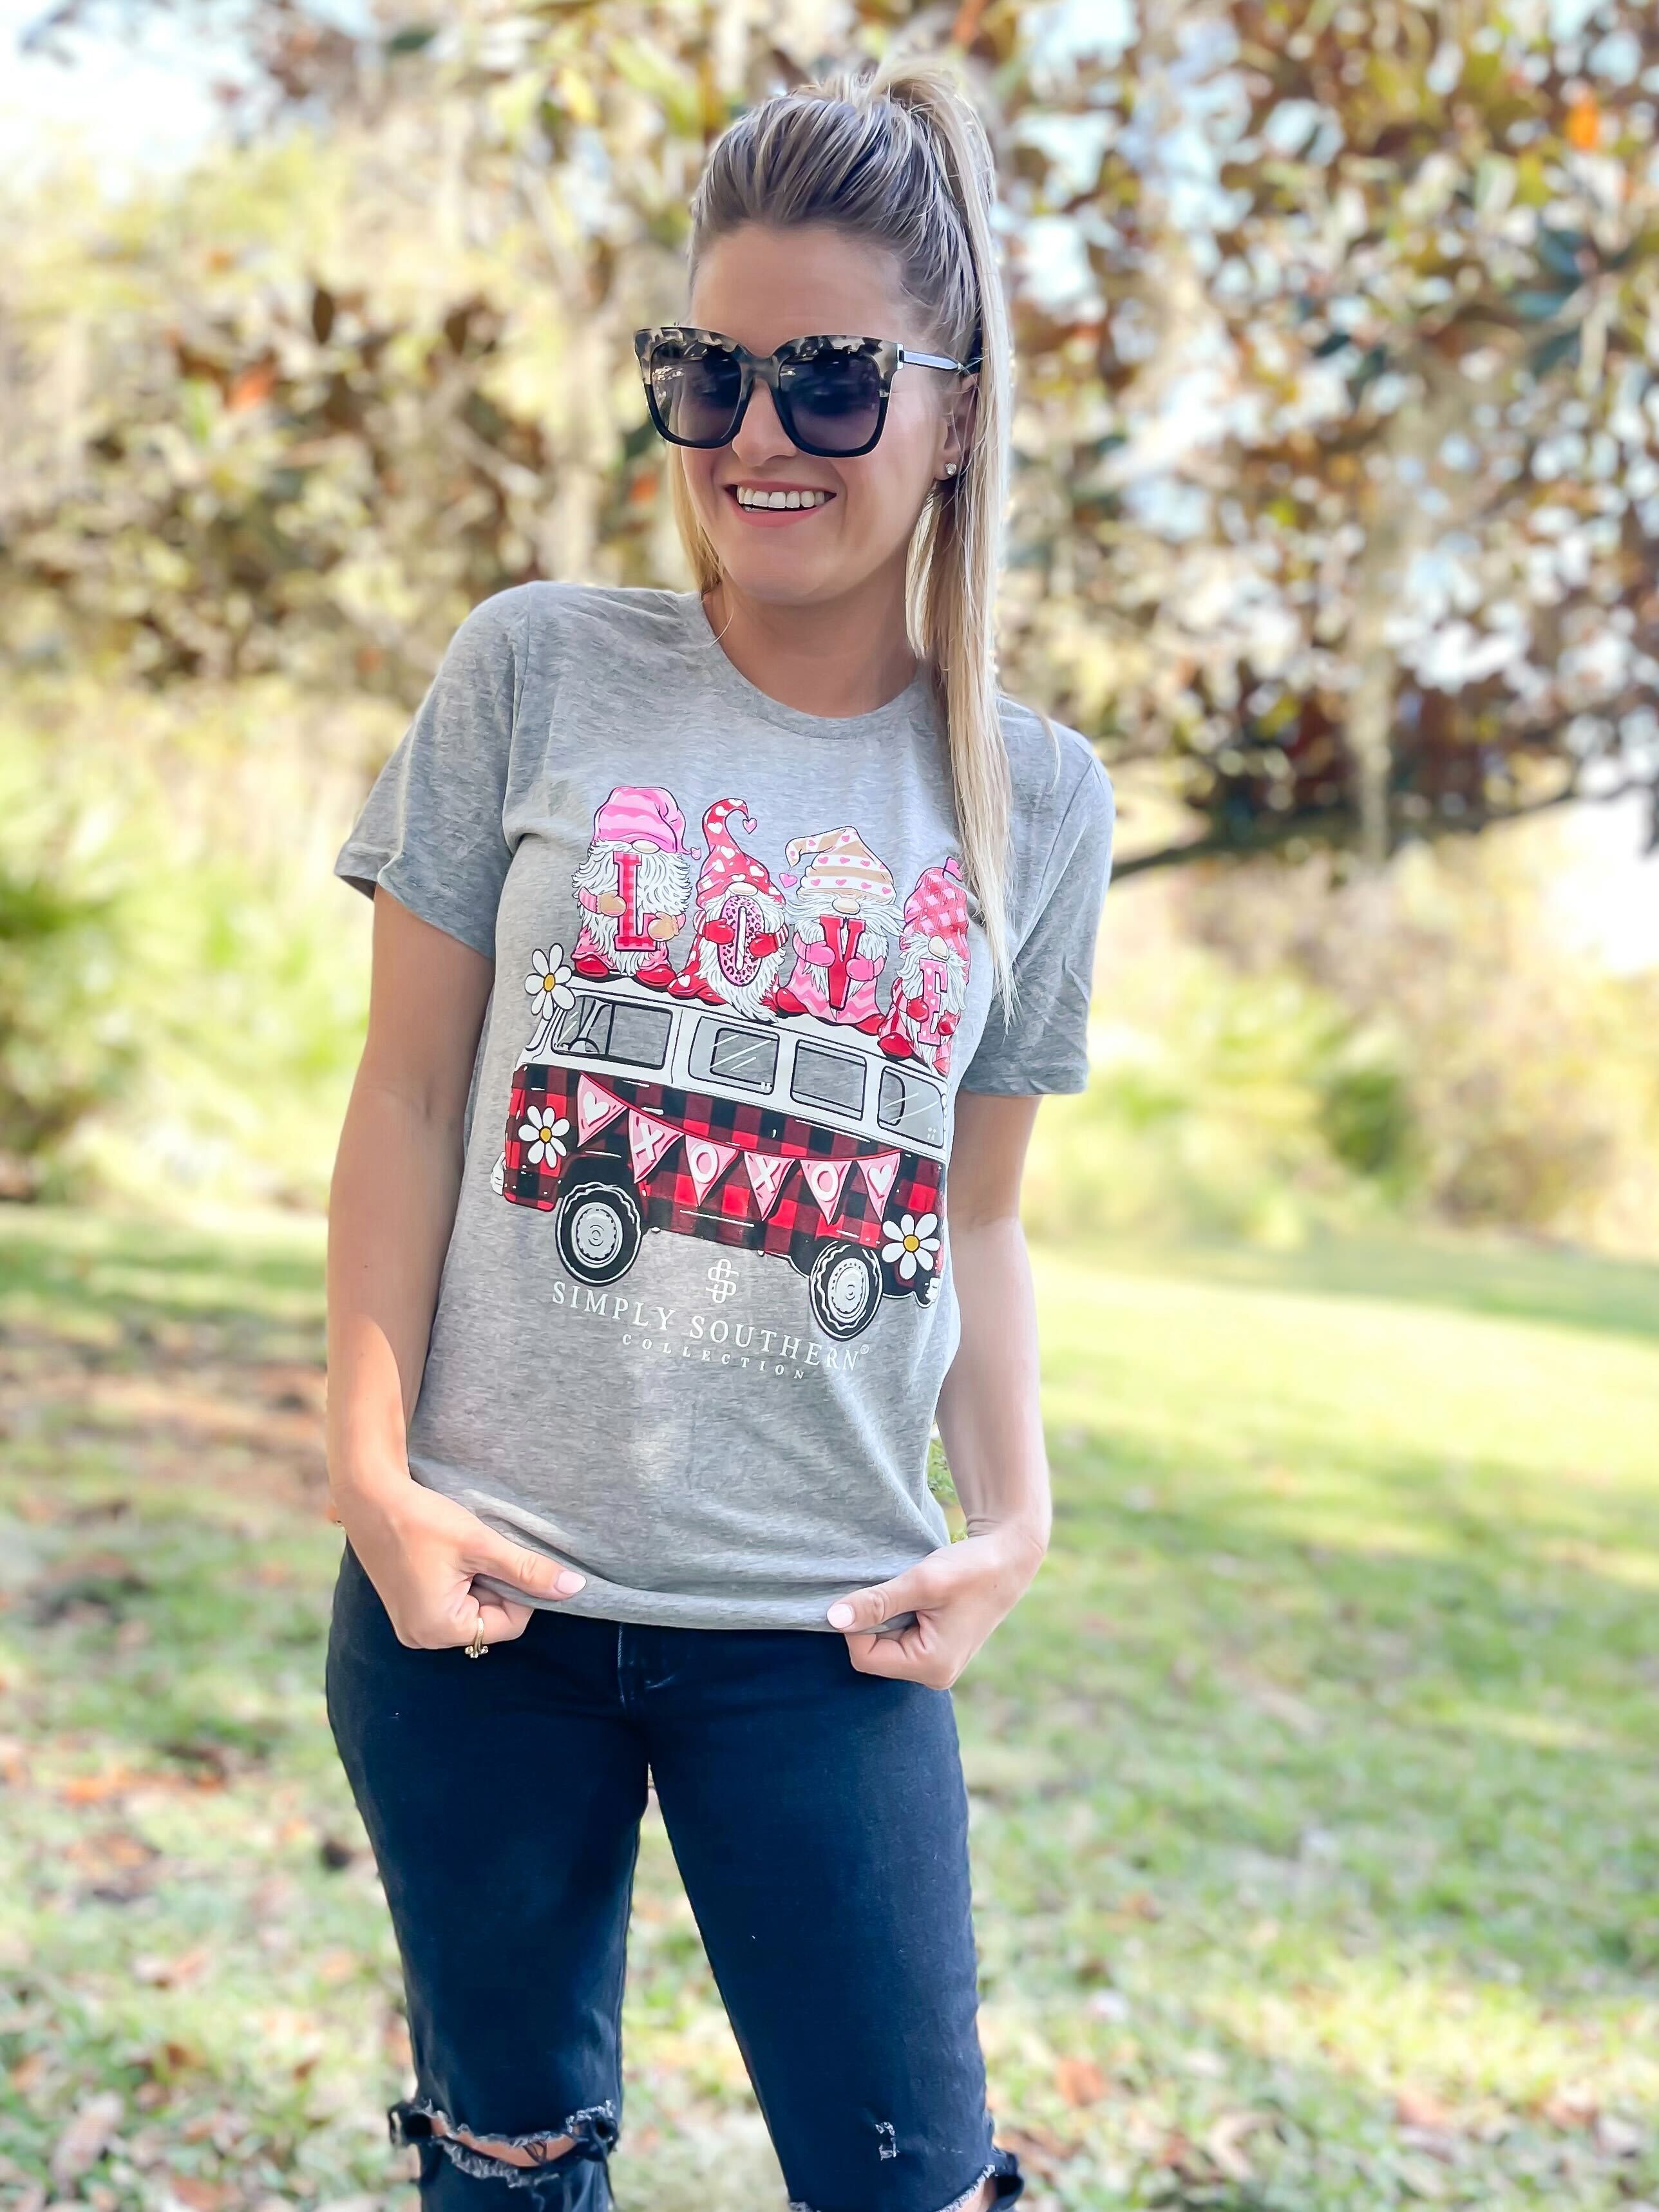 Gnome 'Love' Bus Short Sleeve Tee by Simply Southern